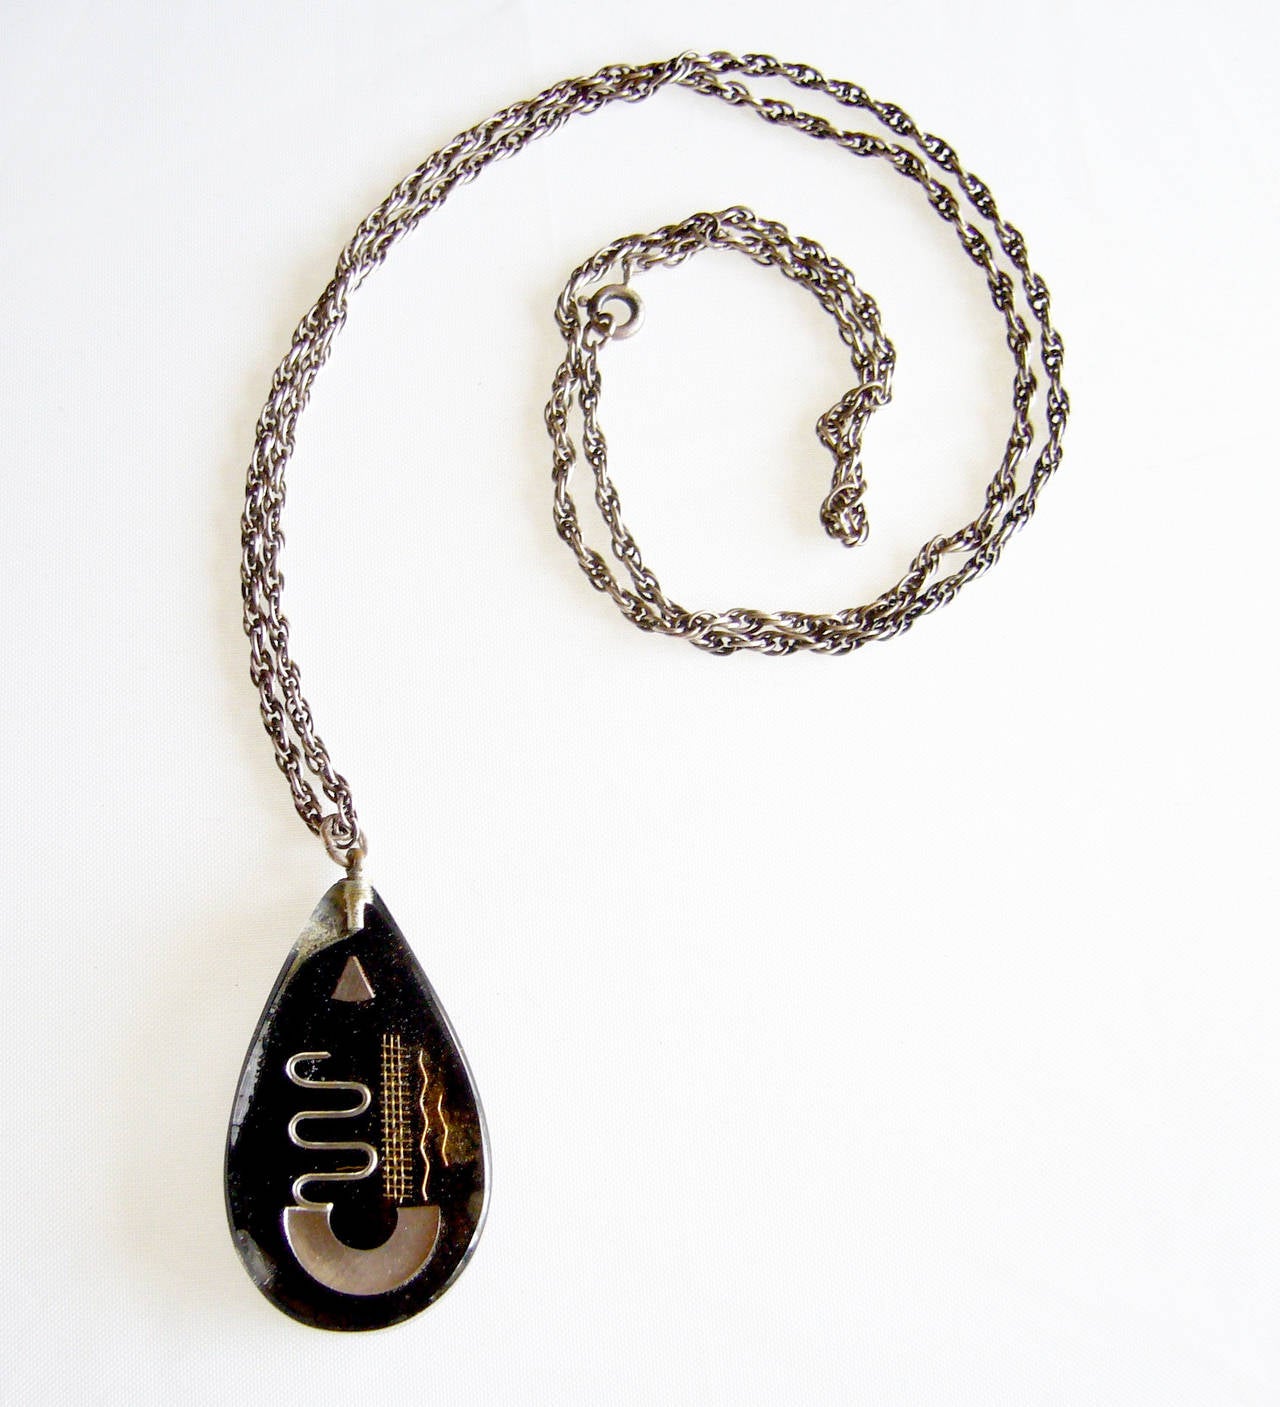 A rare pendant necklace created by Zahara Schatz of Israel. Schatz exhibited and won prestigious prizes in the U.S. and Europe, including the Milan Triennale and The Museum of Modern Art in New York, where she was recognized for a 1951 lamp design.